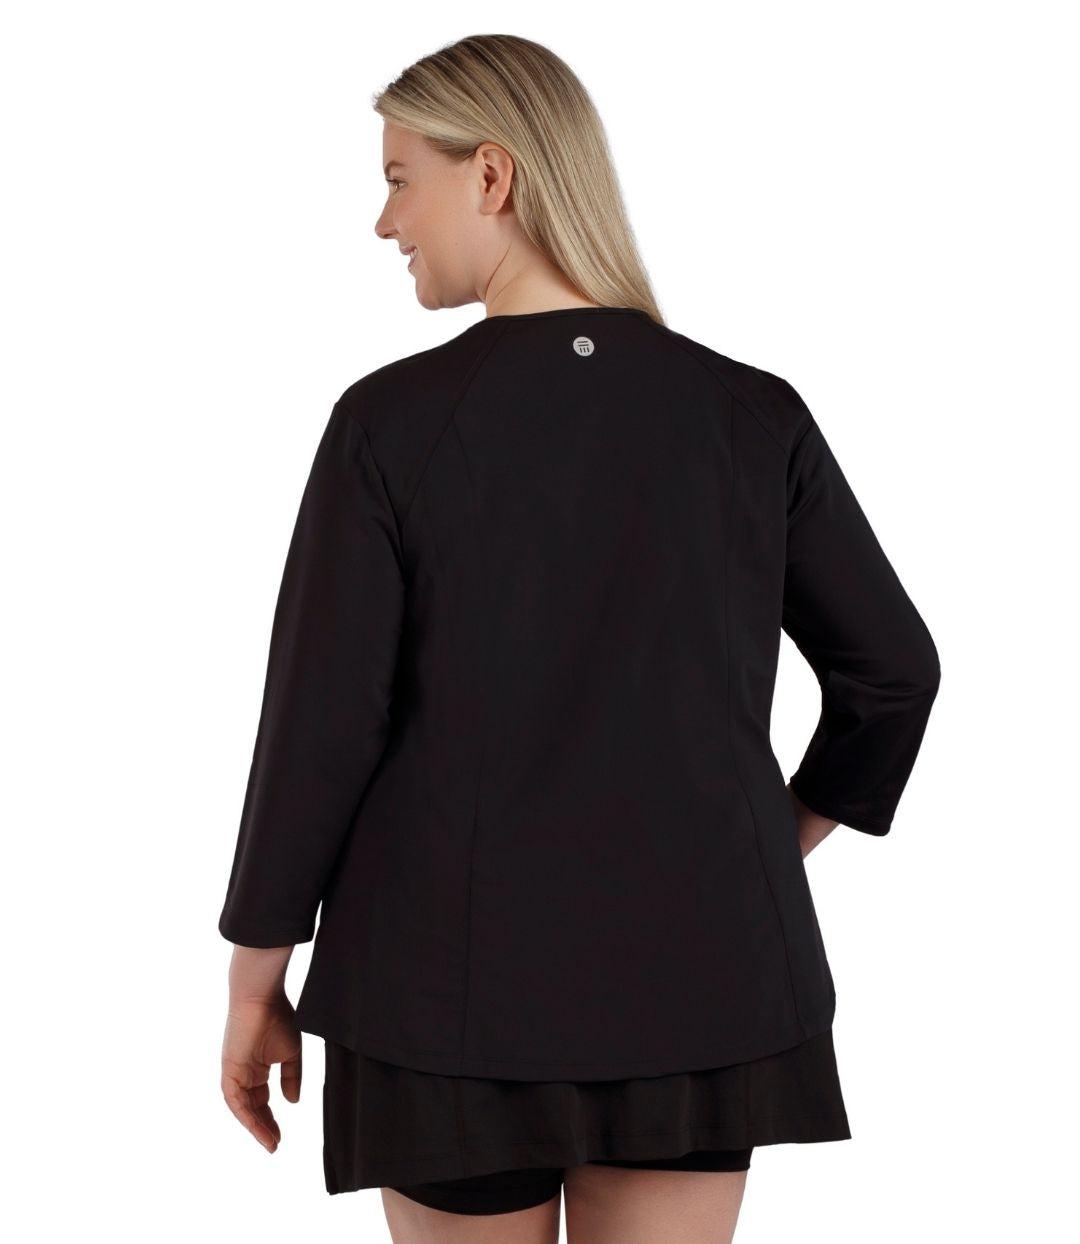 Plus size woman, back view, wearing QuikEnergy  ¾ Sleeve Swim and Sun Top Black and Turq. Solid black back and sleeves. 